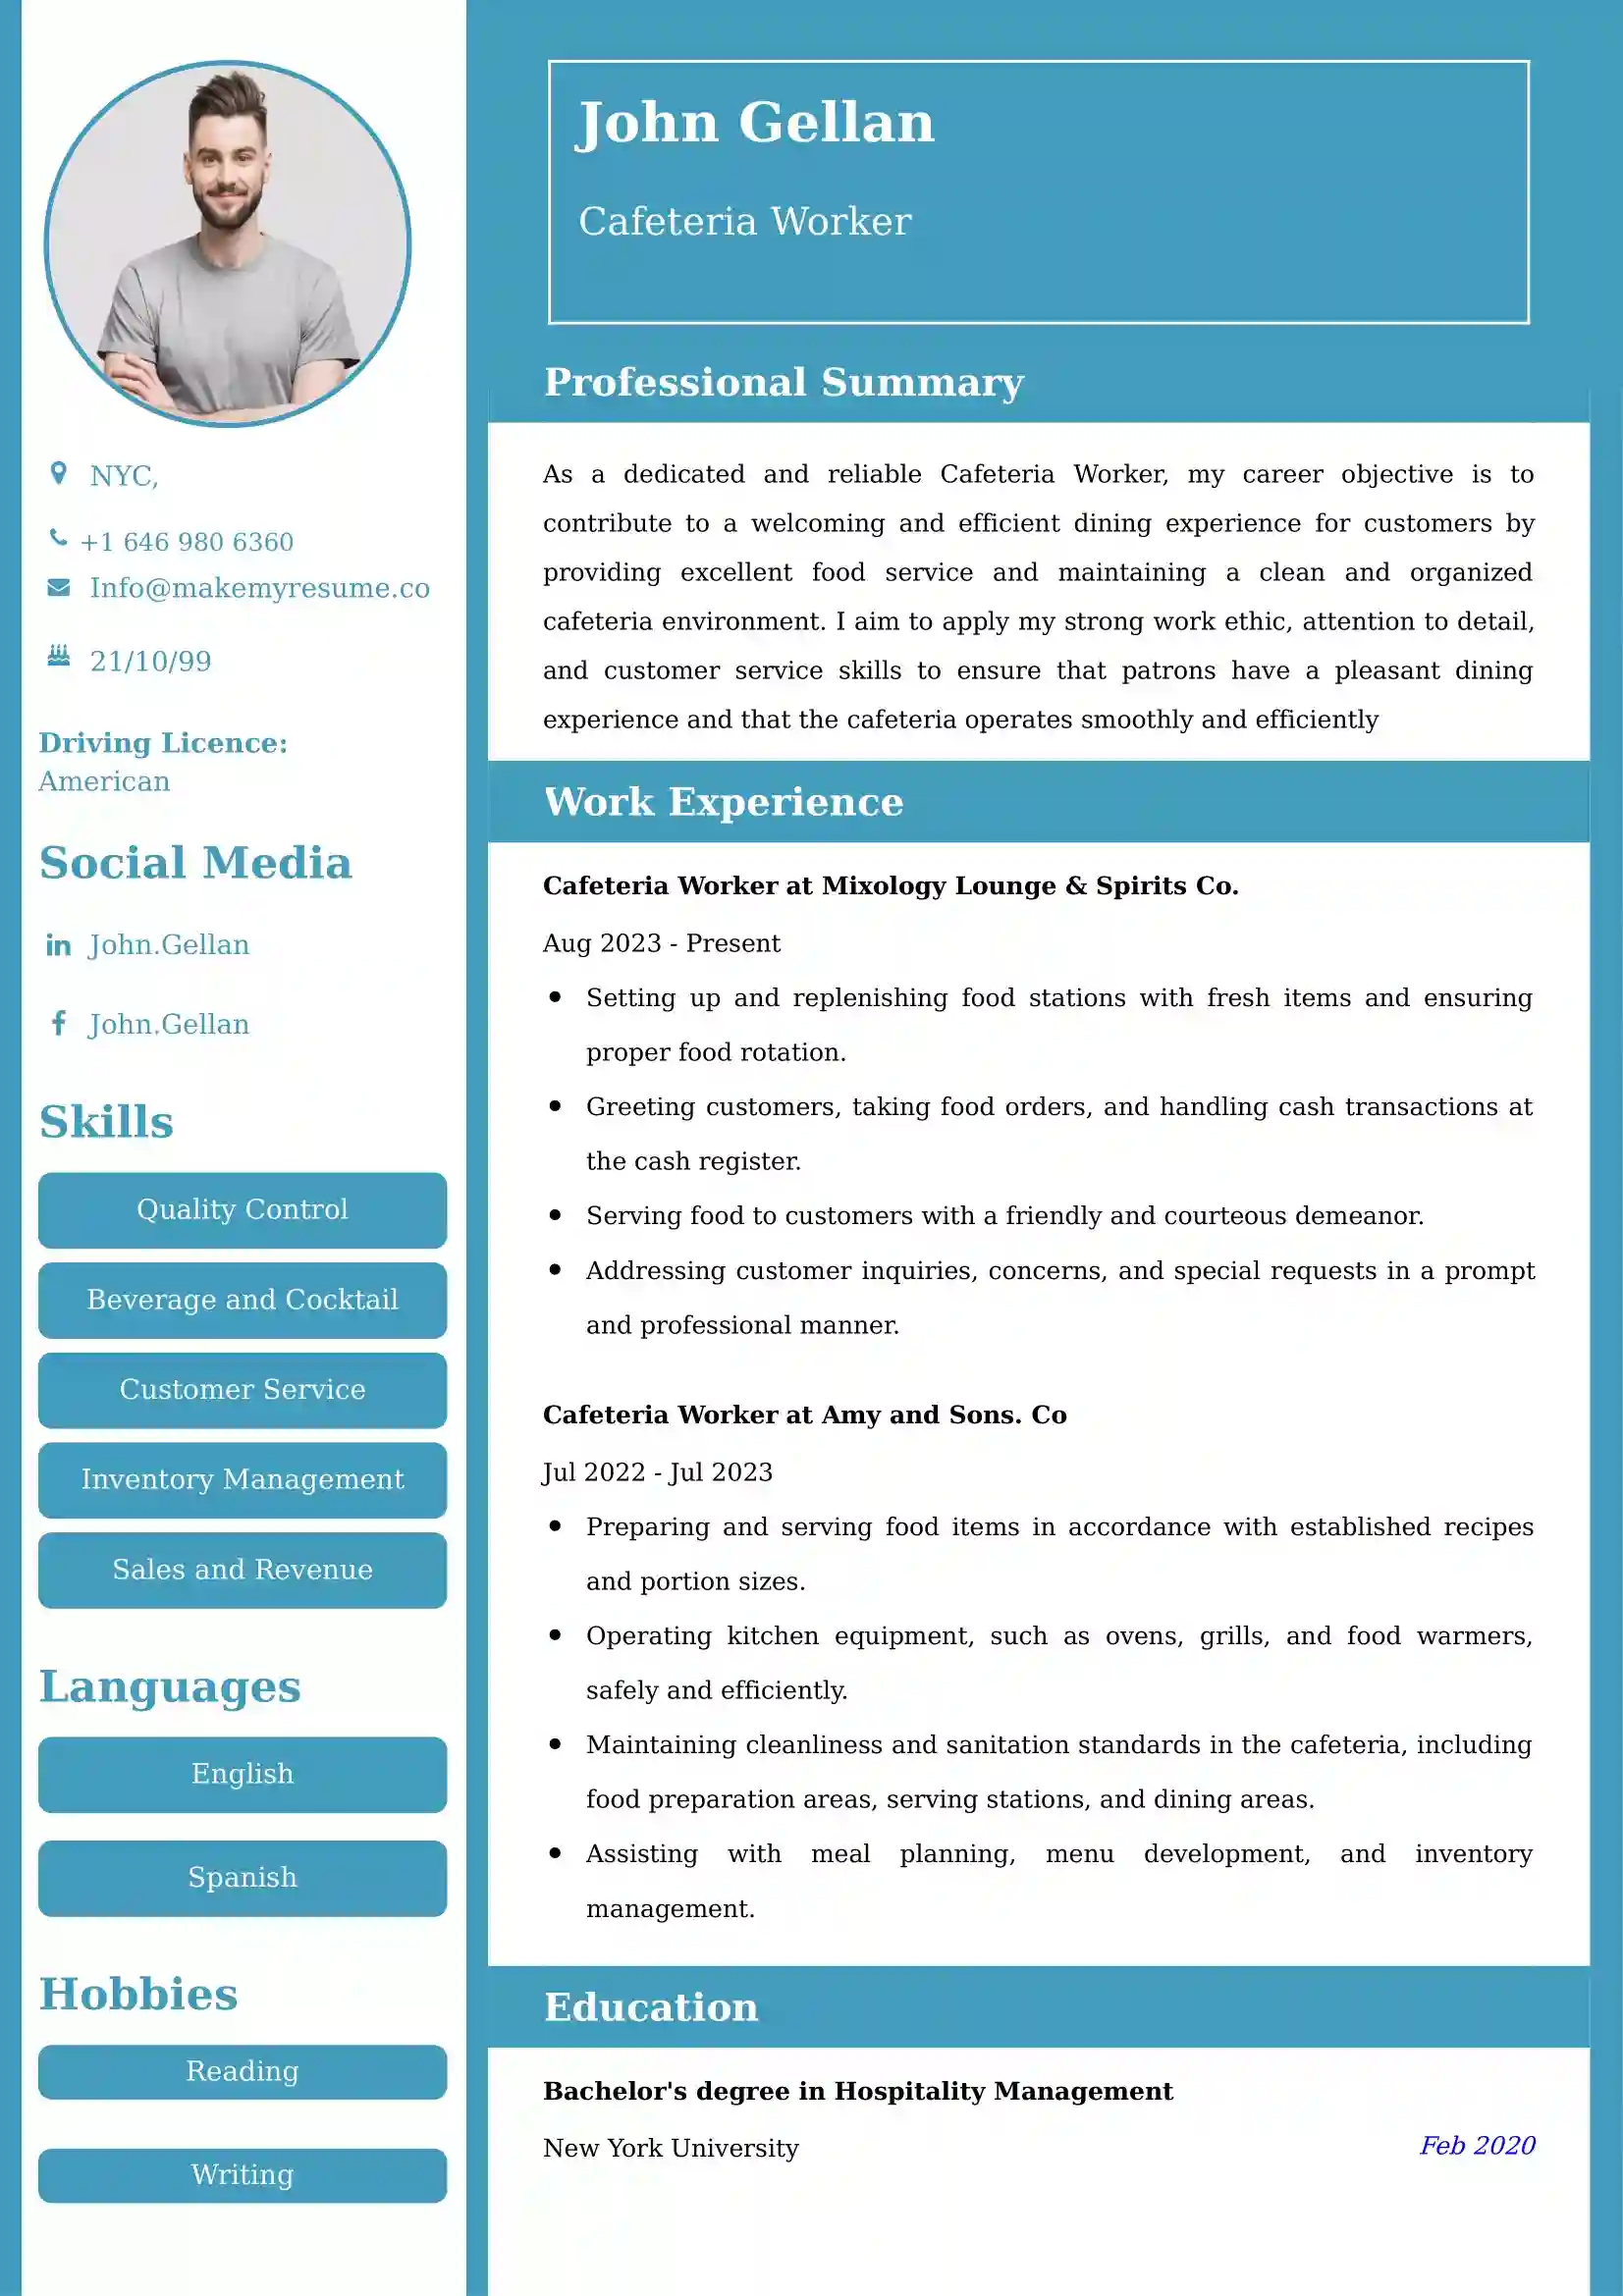 Cafeteria Worker Resume Examples - UK Format, Latest Template.